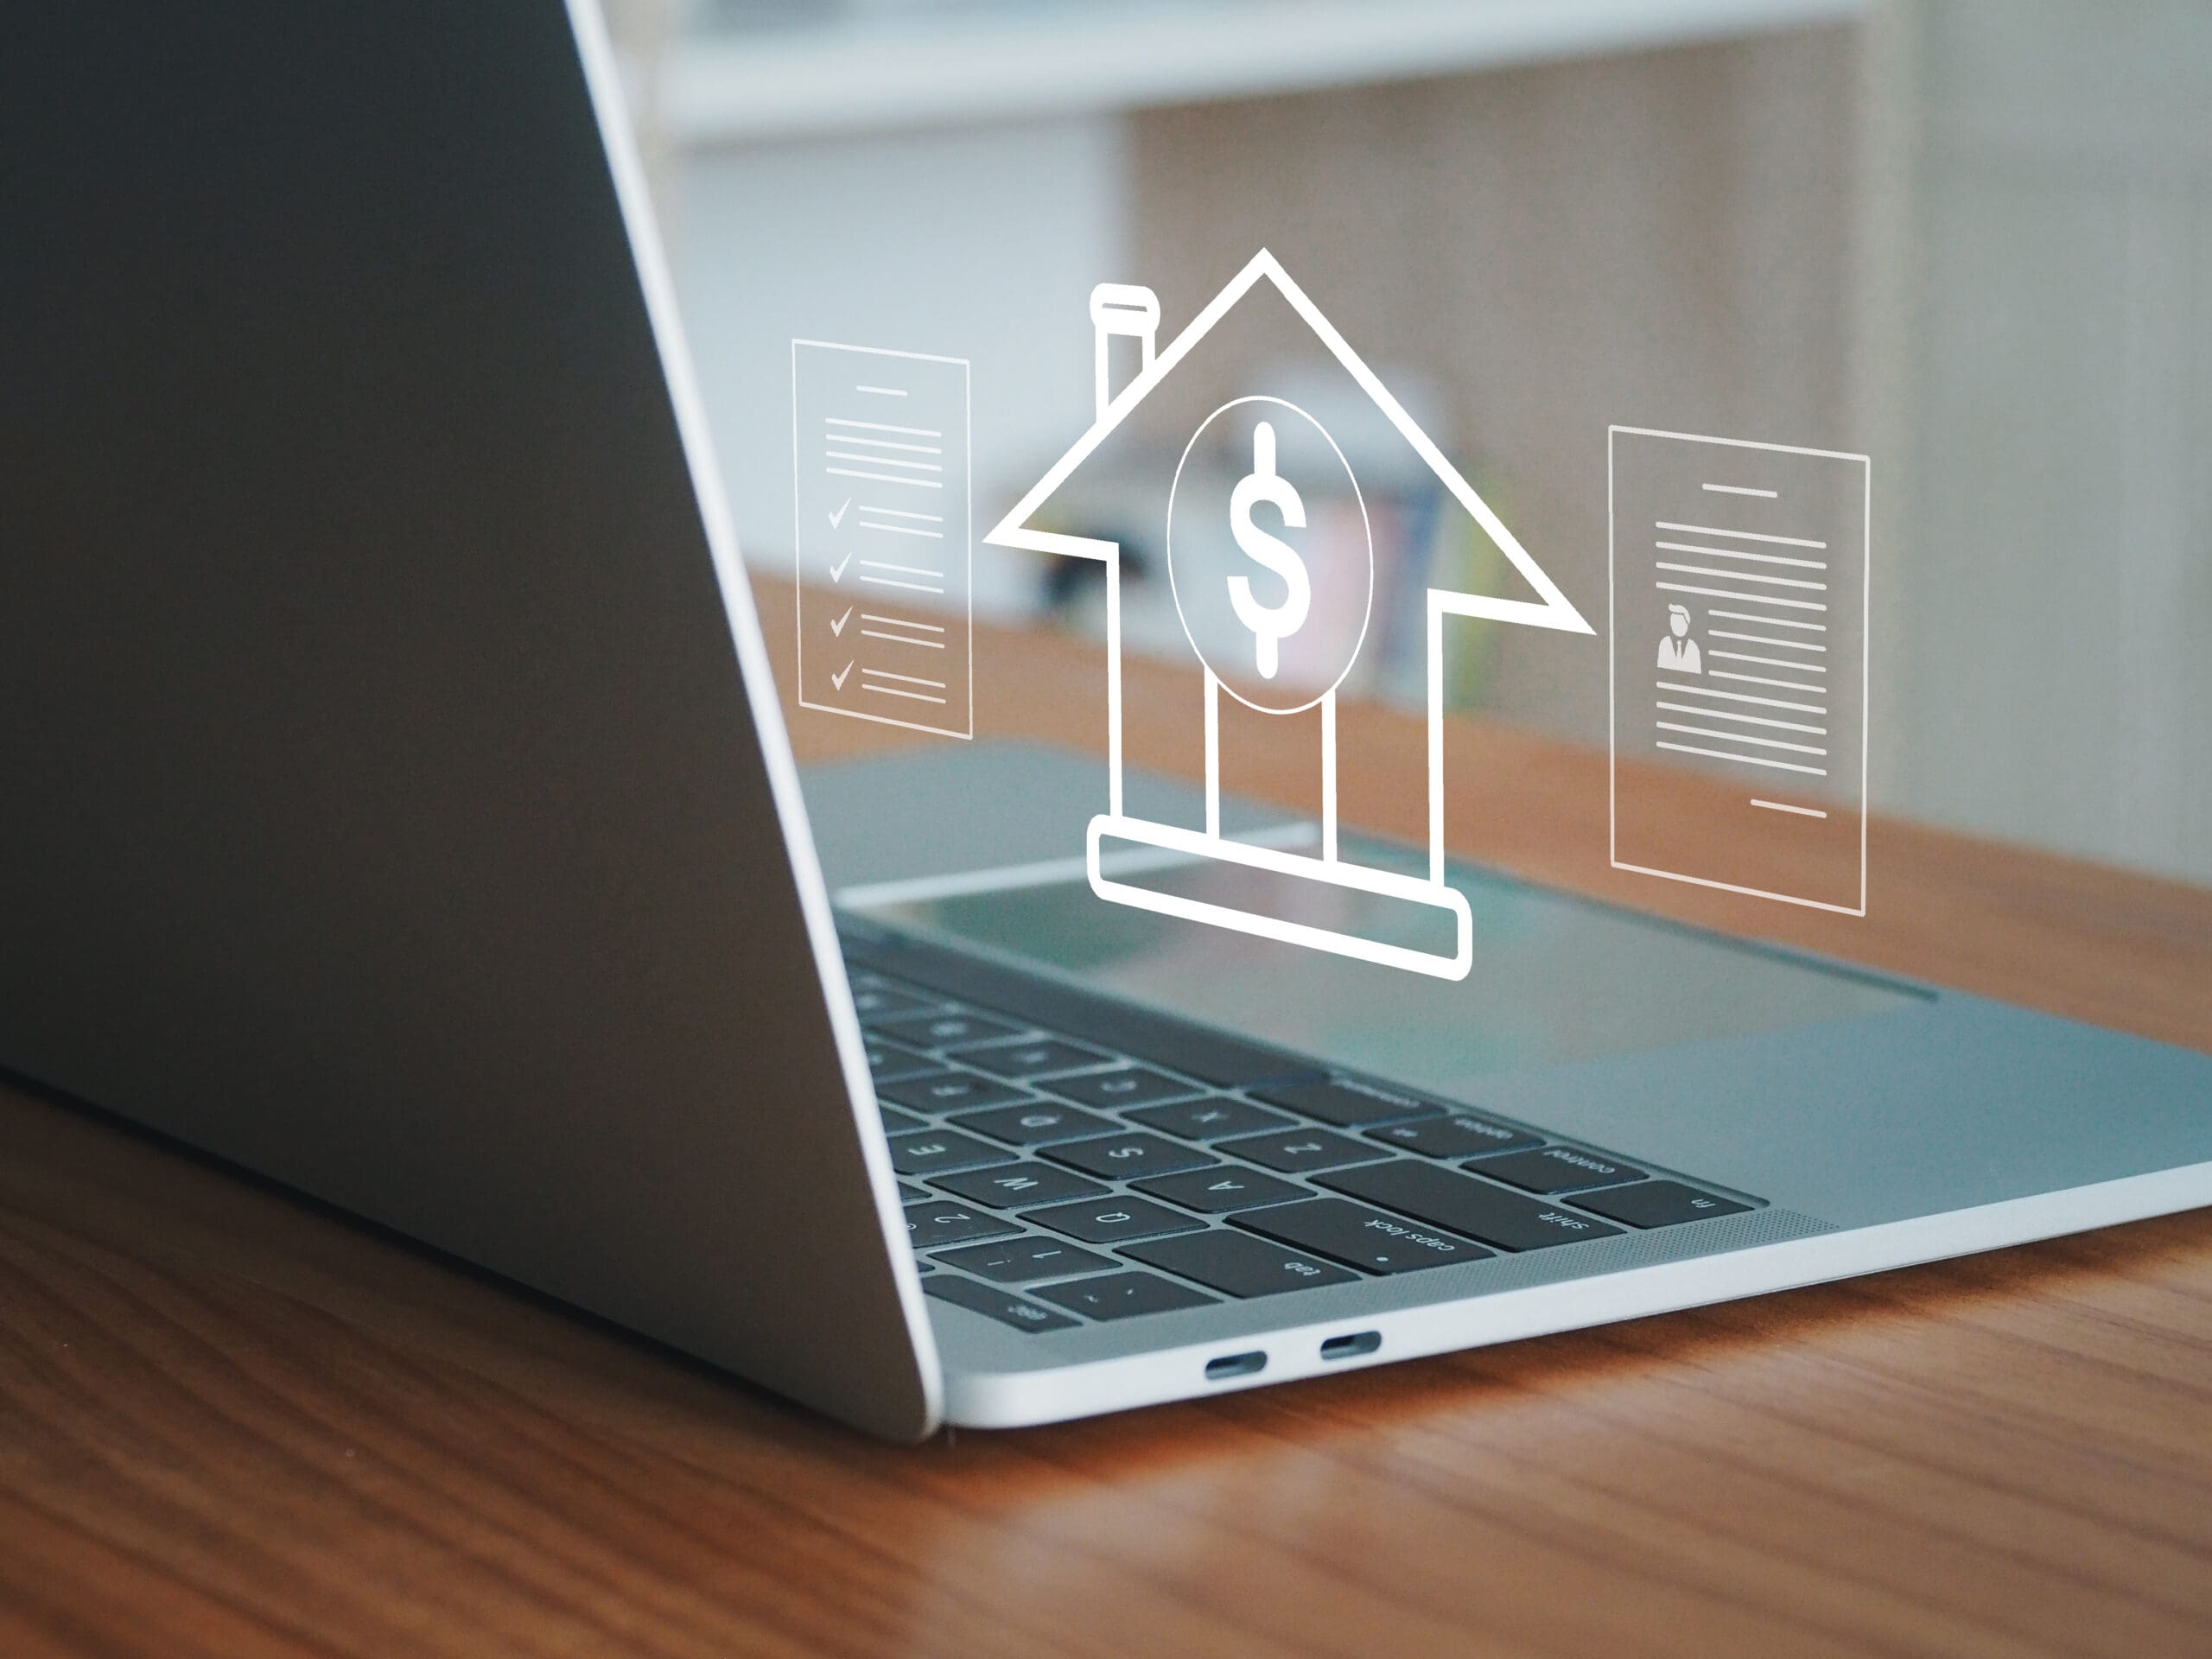 Real estate investment, businessman or online house broker reviewing real estate transaction documents to make a profit in the future on the screen like real digital